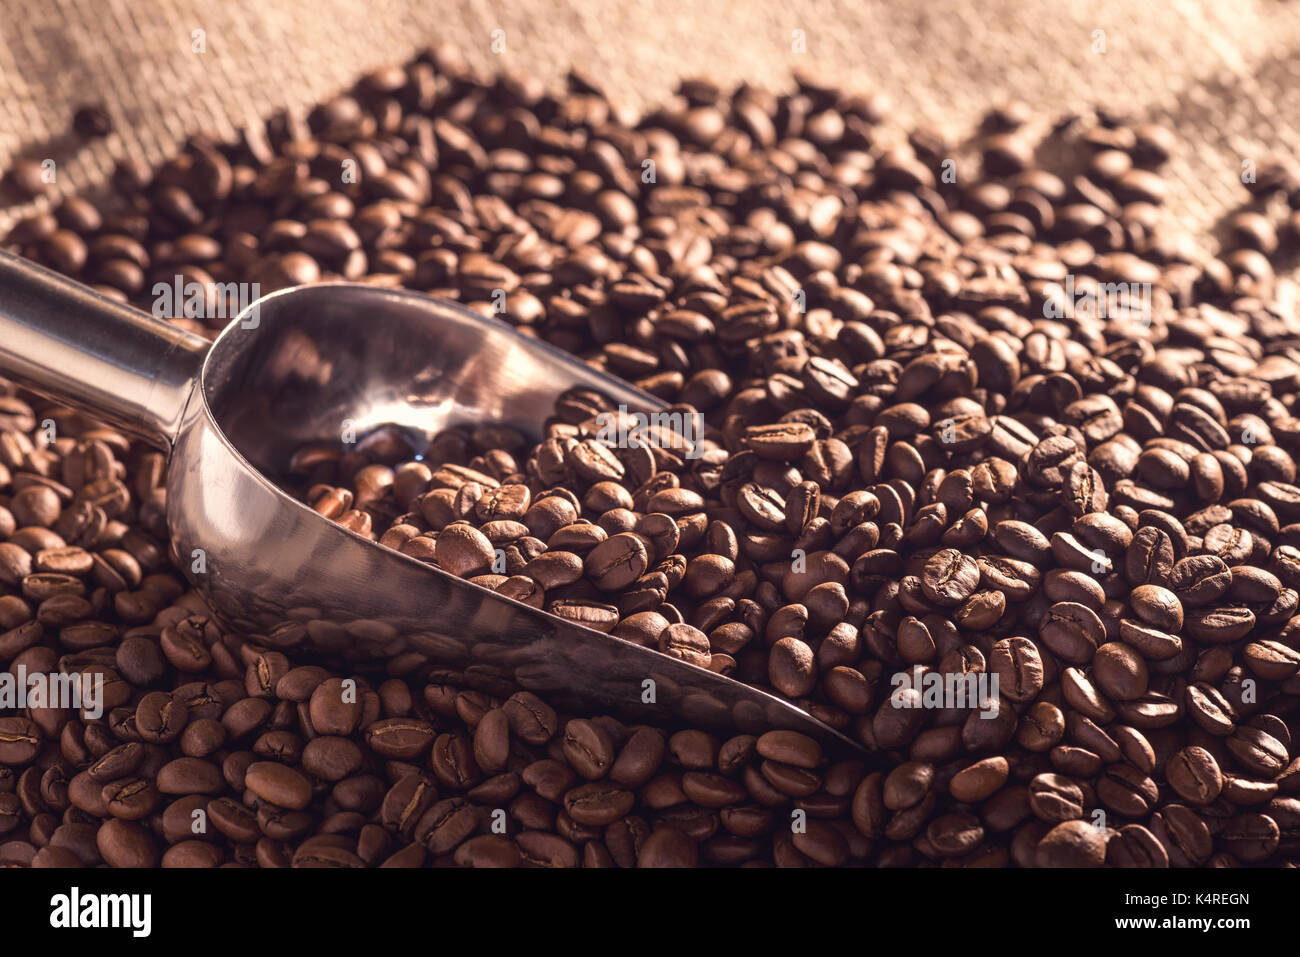 Stainless steel spoon picking up roasted coffee beans. Stock Photo